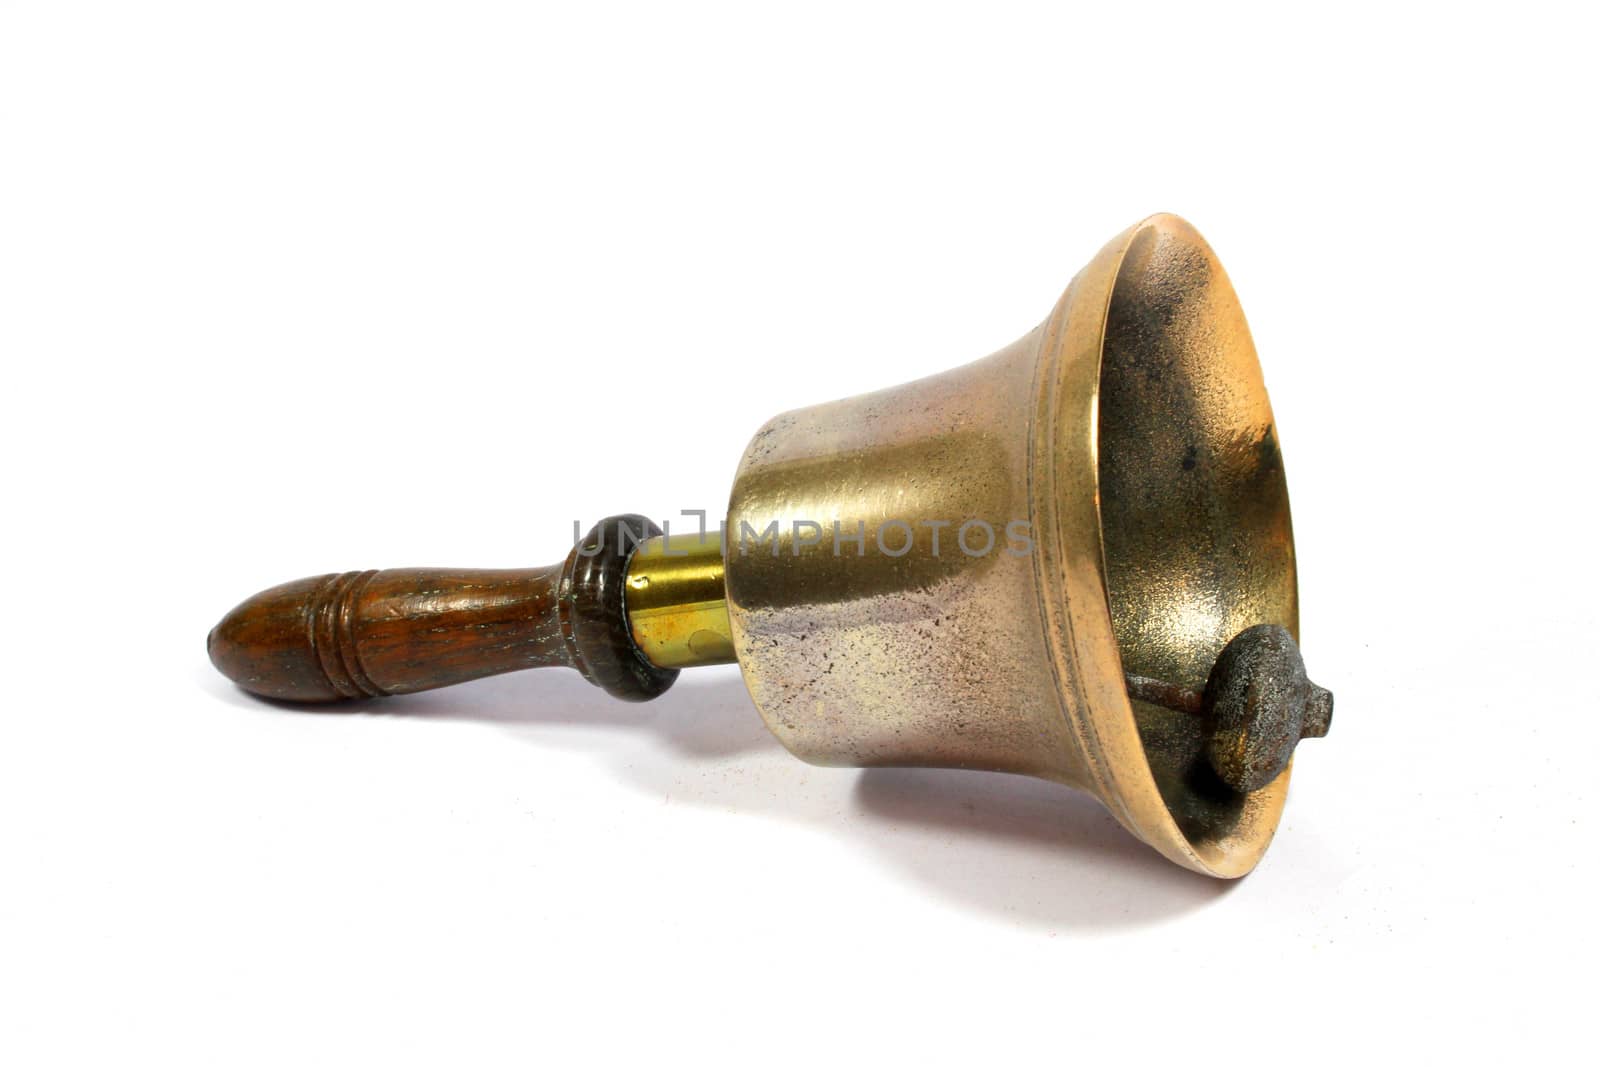 A Vintage Brass School Bell On White Background